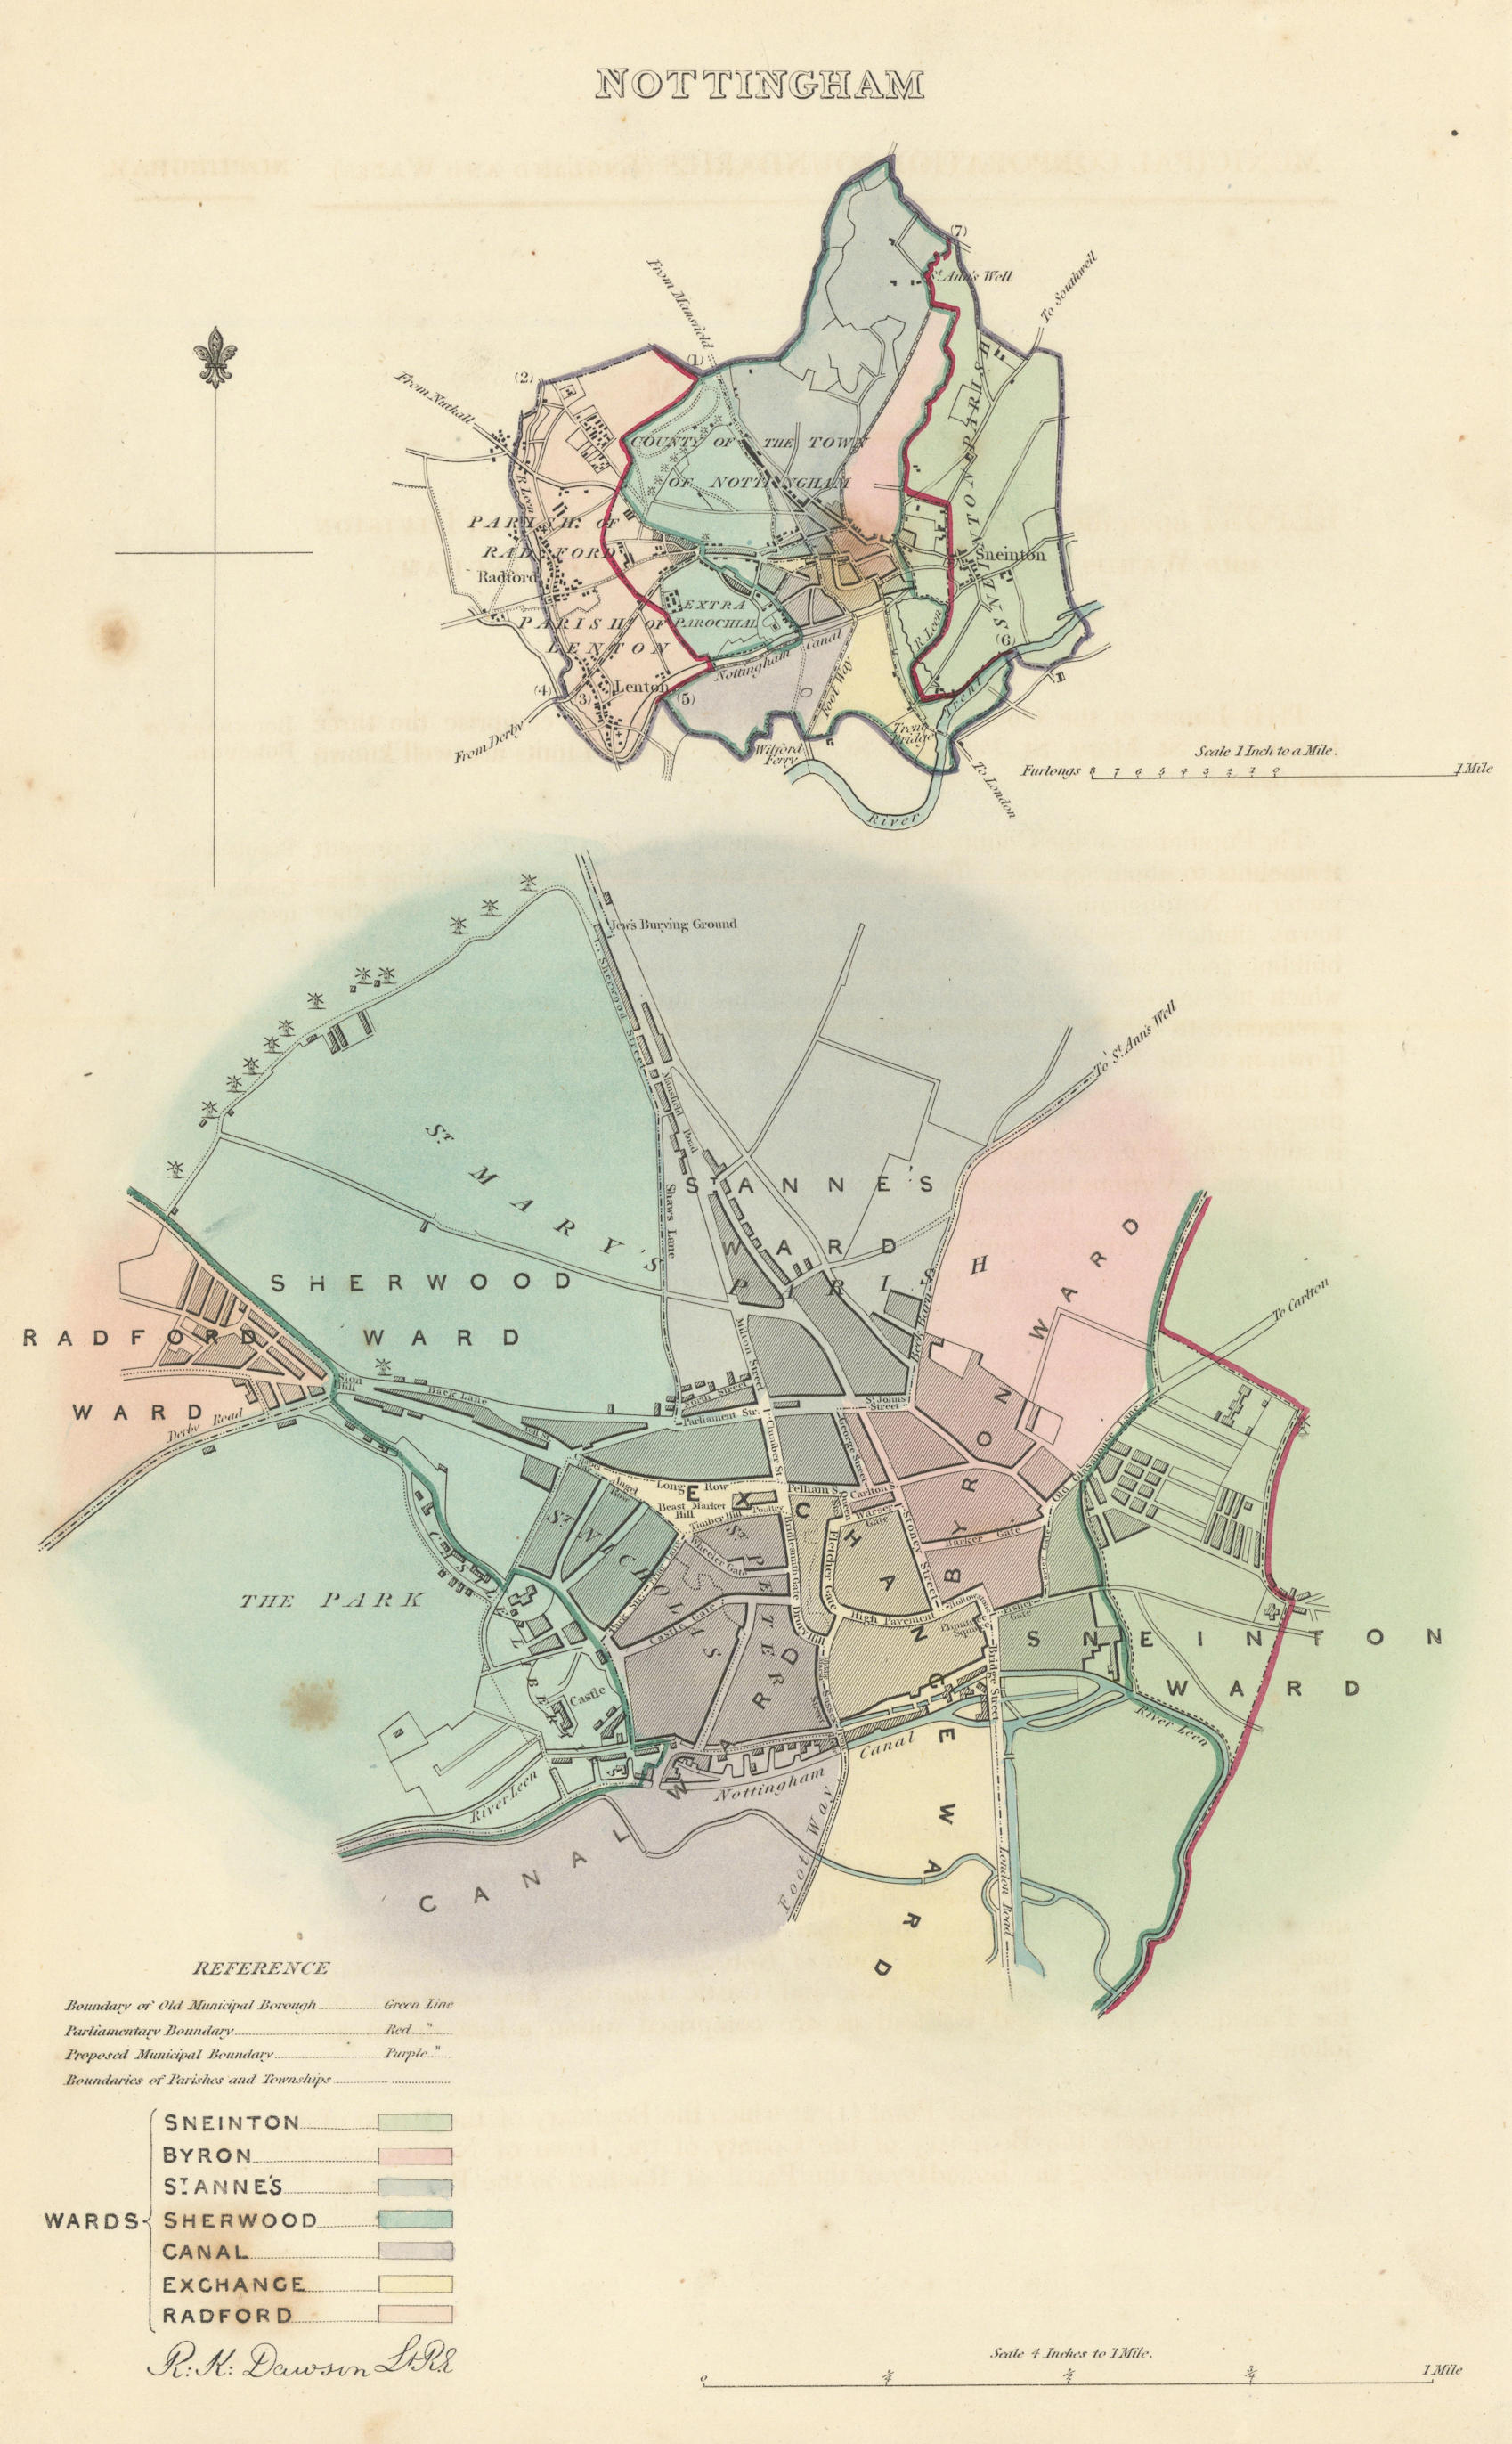 Associate Product NOTTINGHAM borough/town/city plan. BOUNDARY COMMISSION. DAWSON 1837 old map